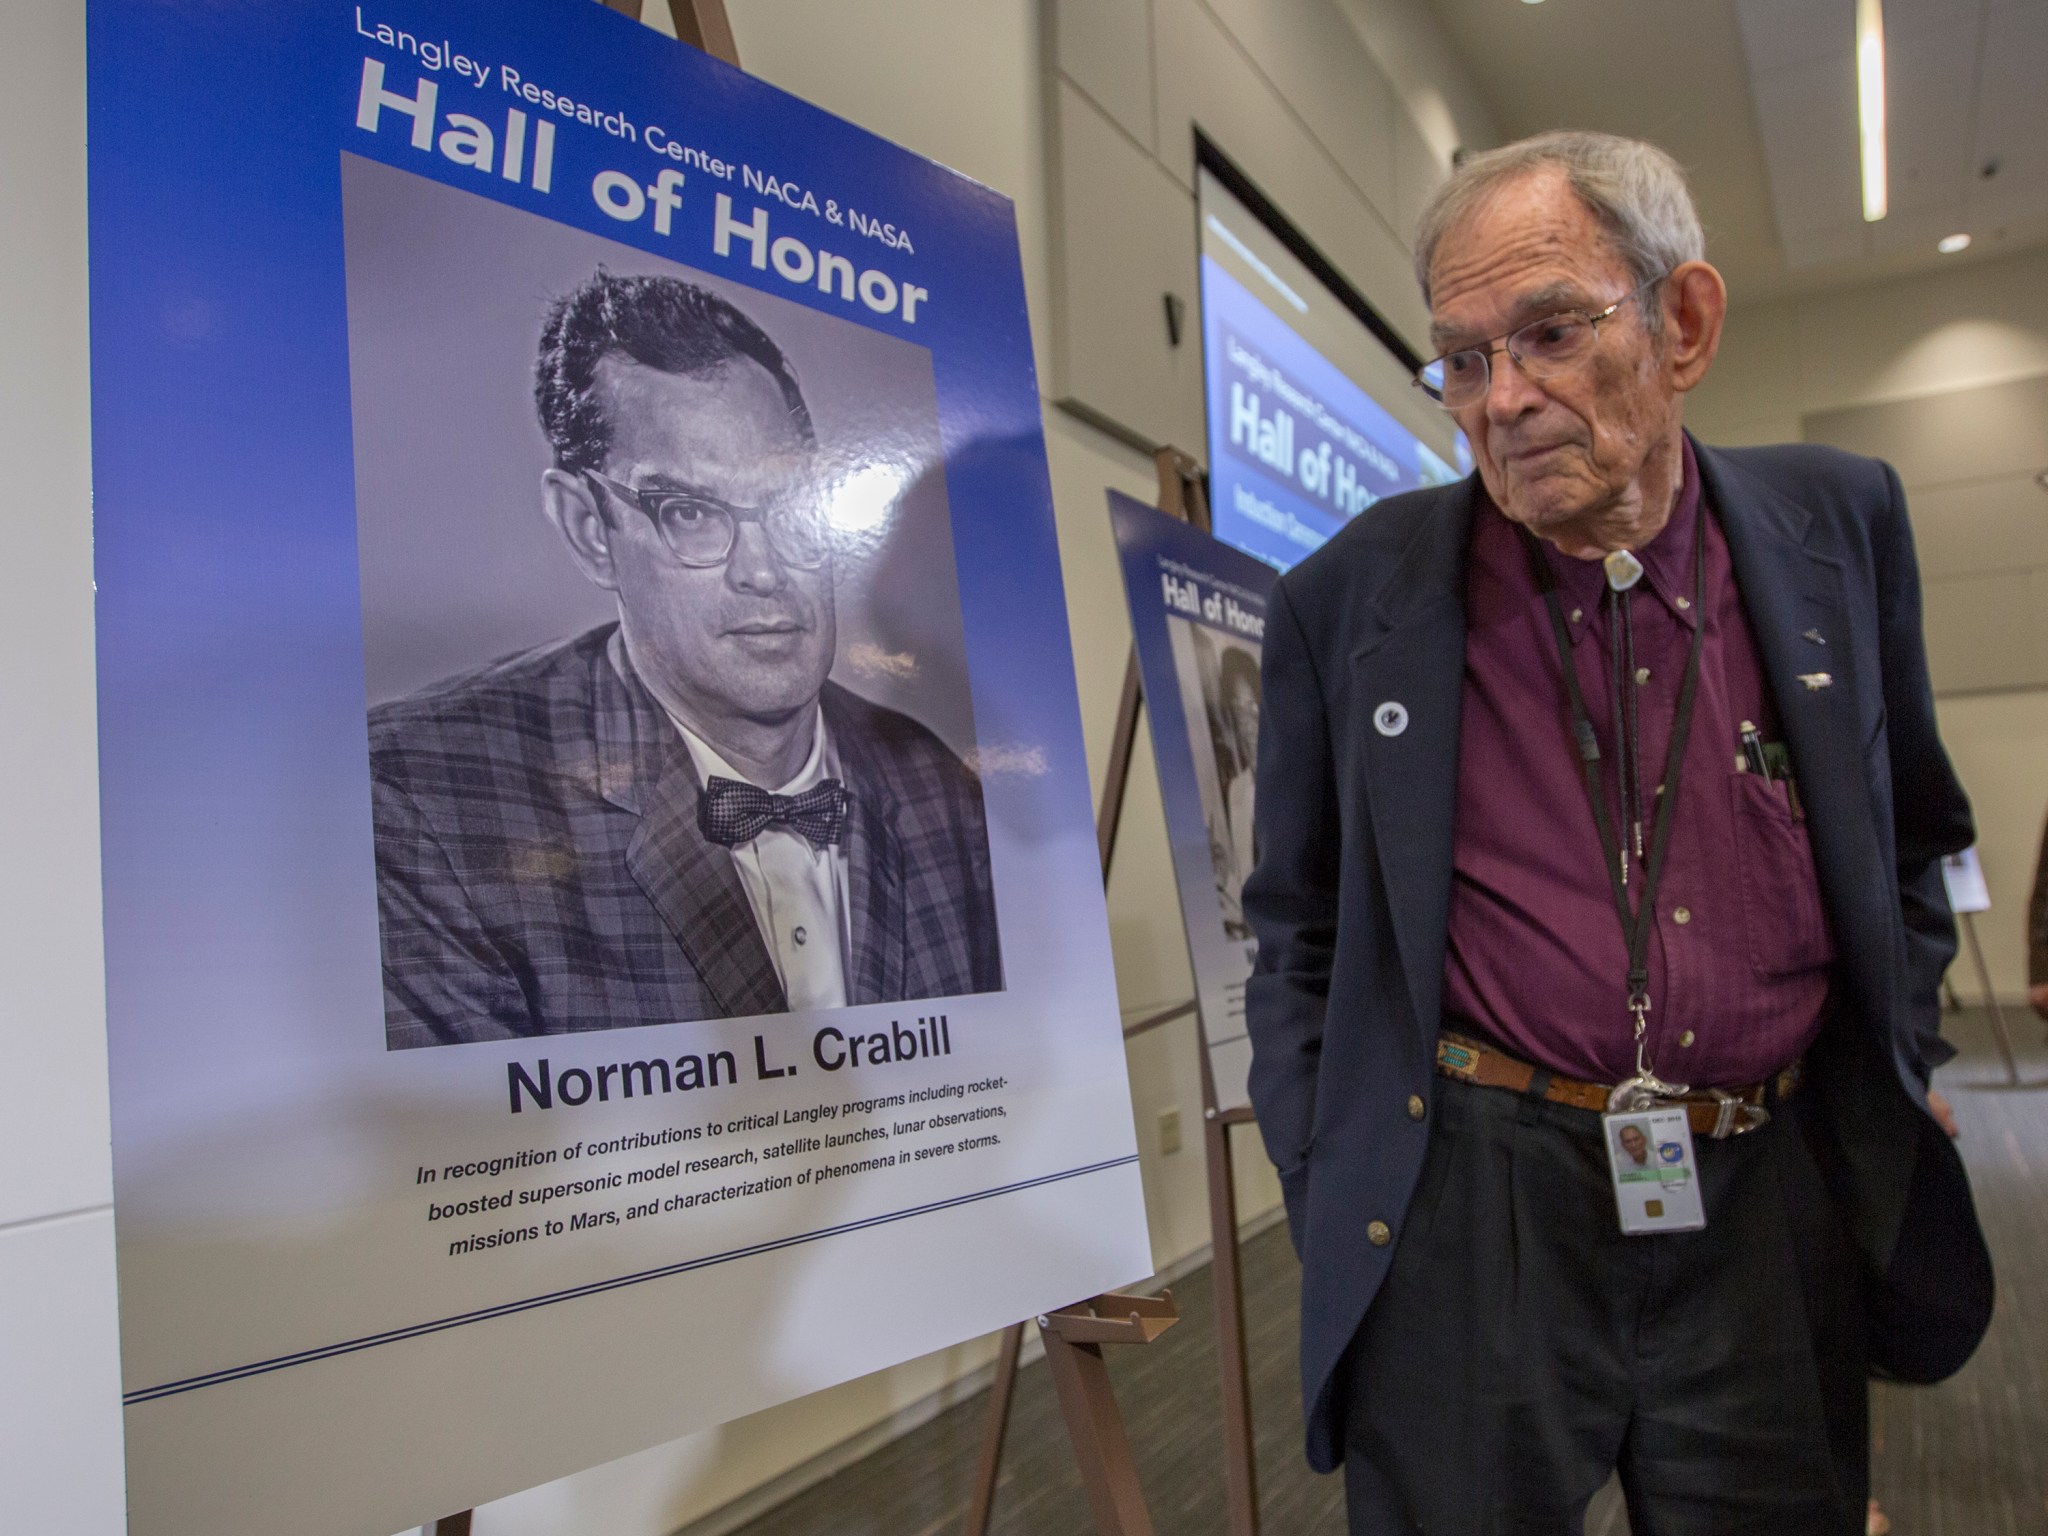 NASA Langley Hall of Honor inductee Norman Crabill looks at a picture of himself after the induction ceremony.